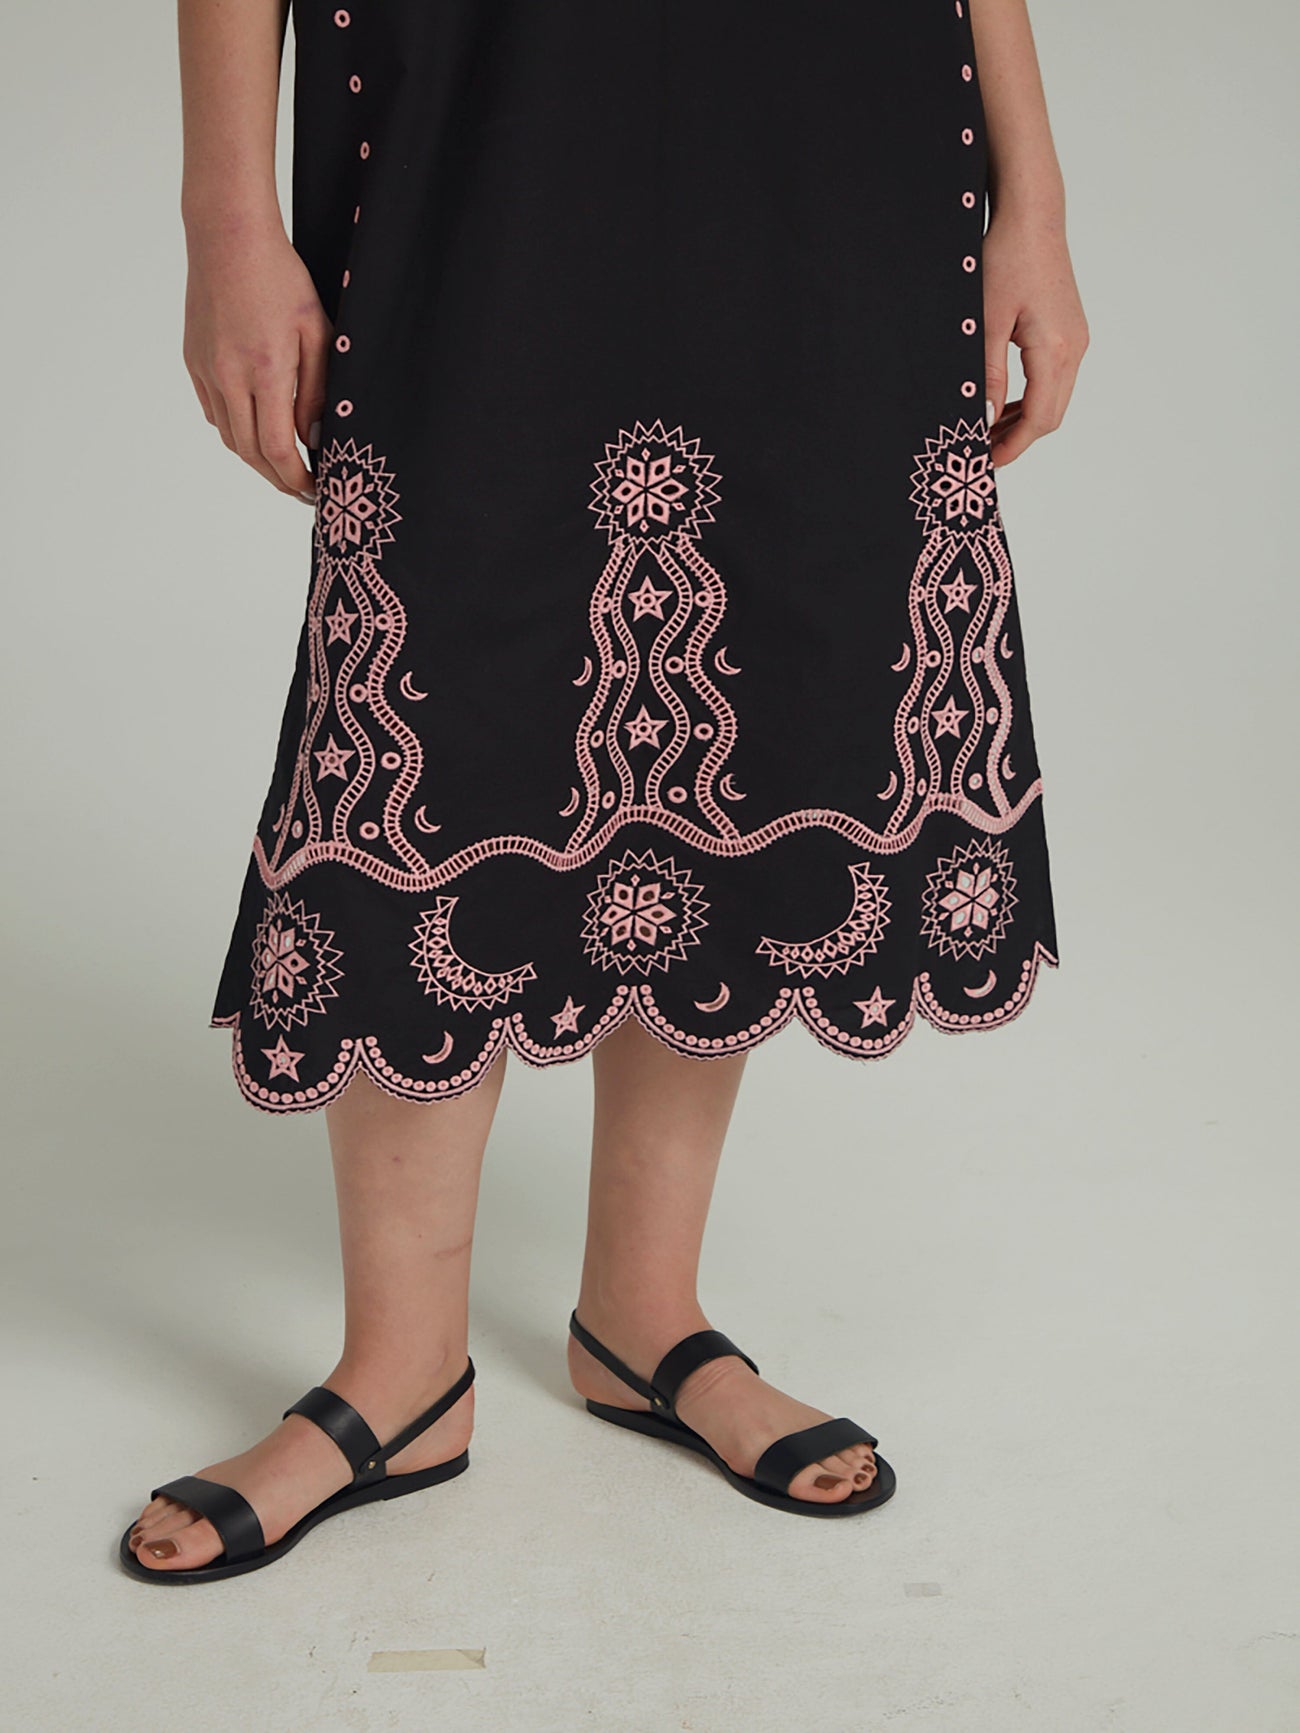 Load image into Gallery viewer, Venyx Dree Cotton Broderie-Anglaise Dress in Black